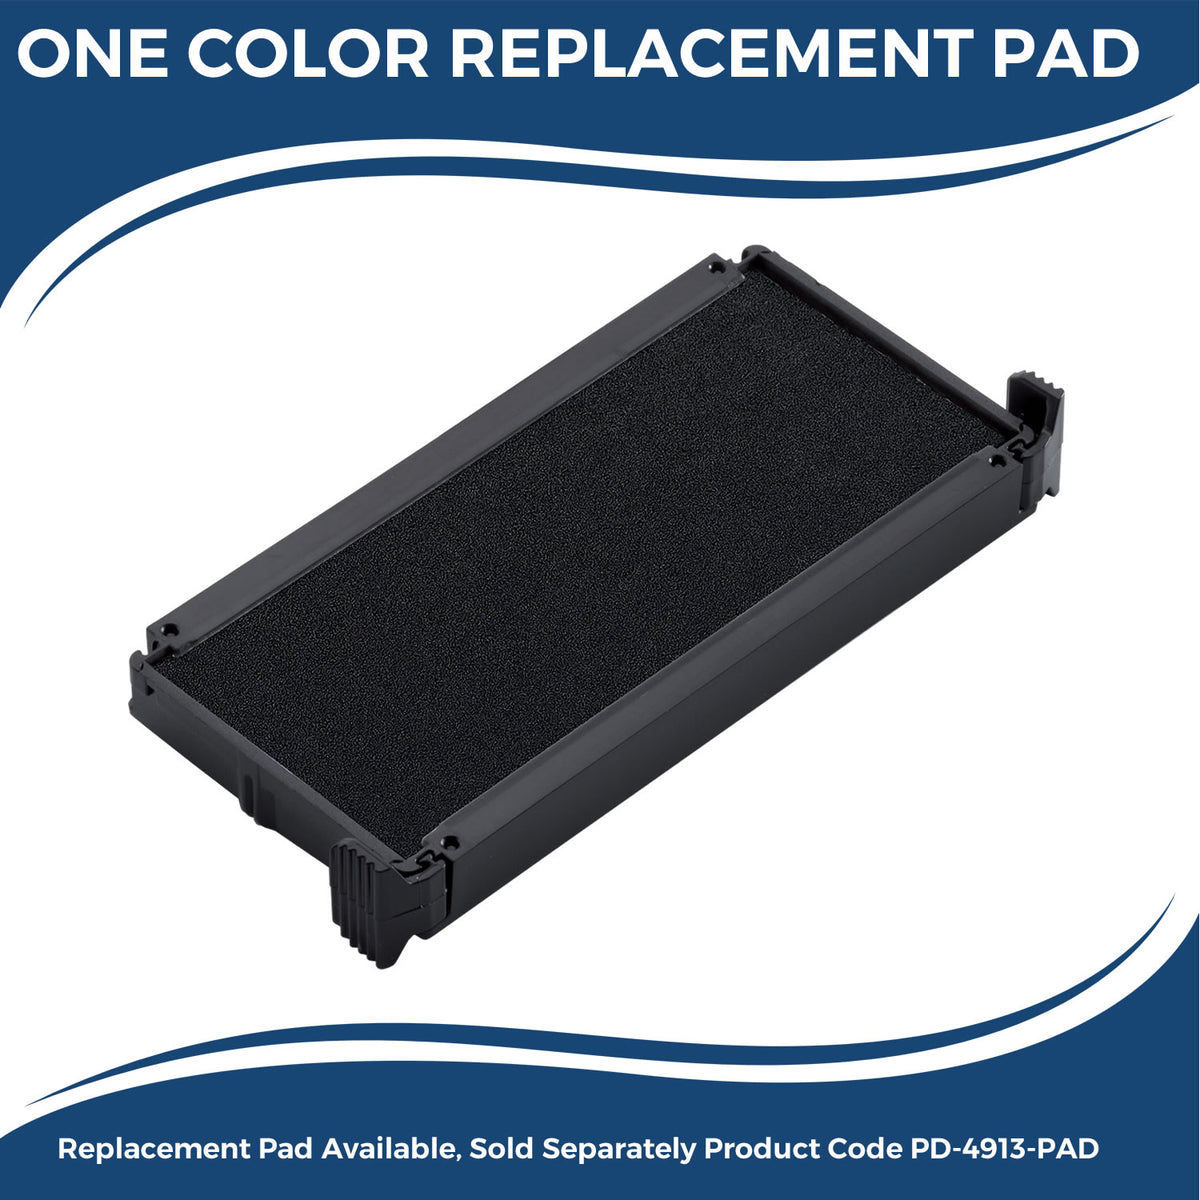 Large Self-Inking Bold Completed Stamp 4887S Large Replacment Pad